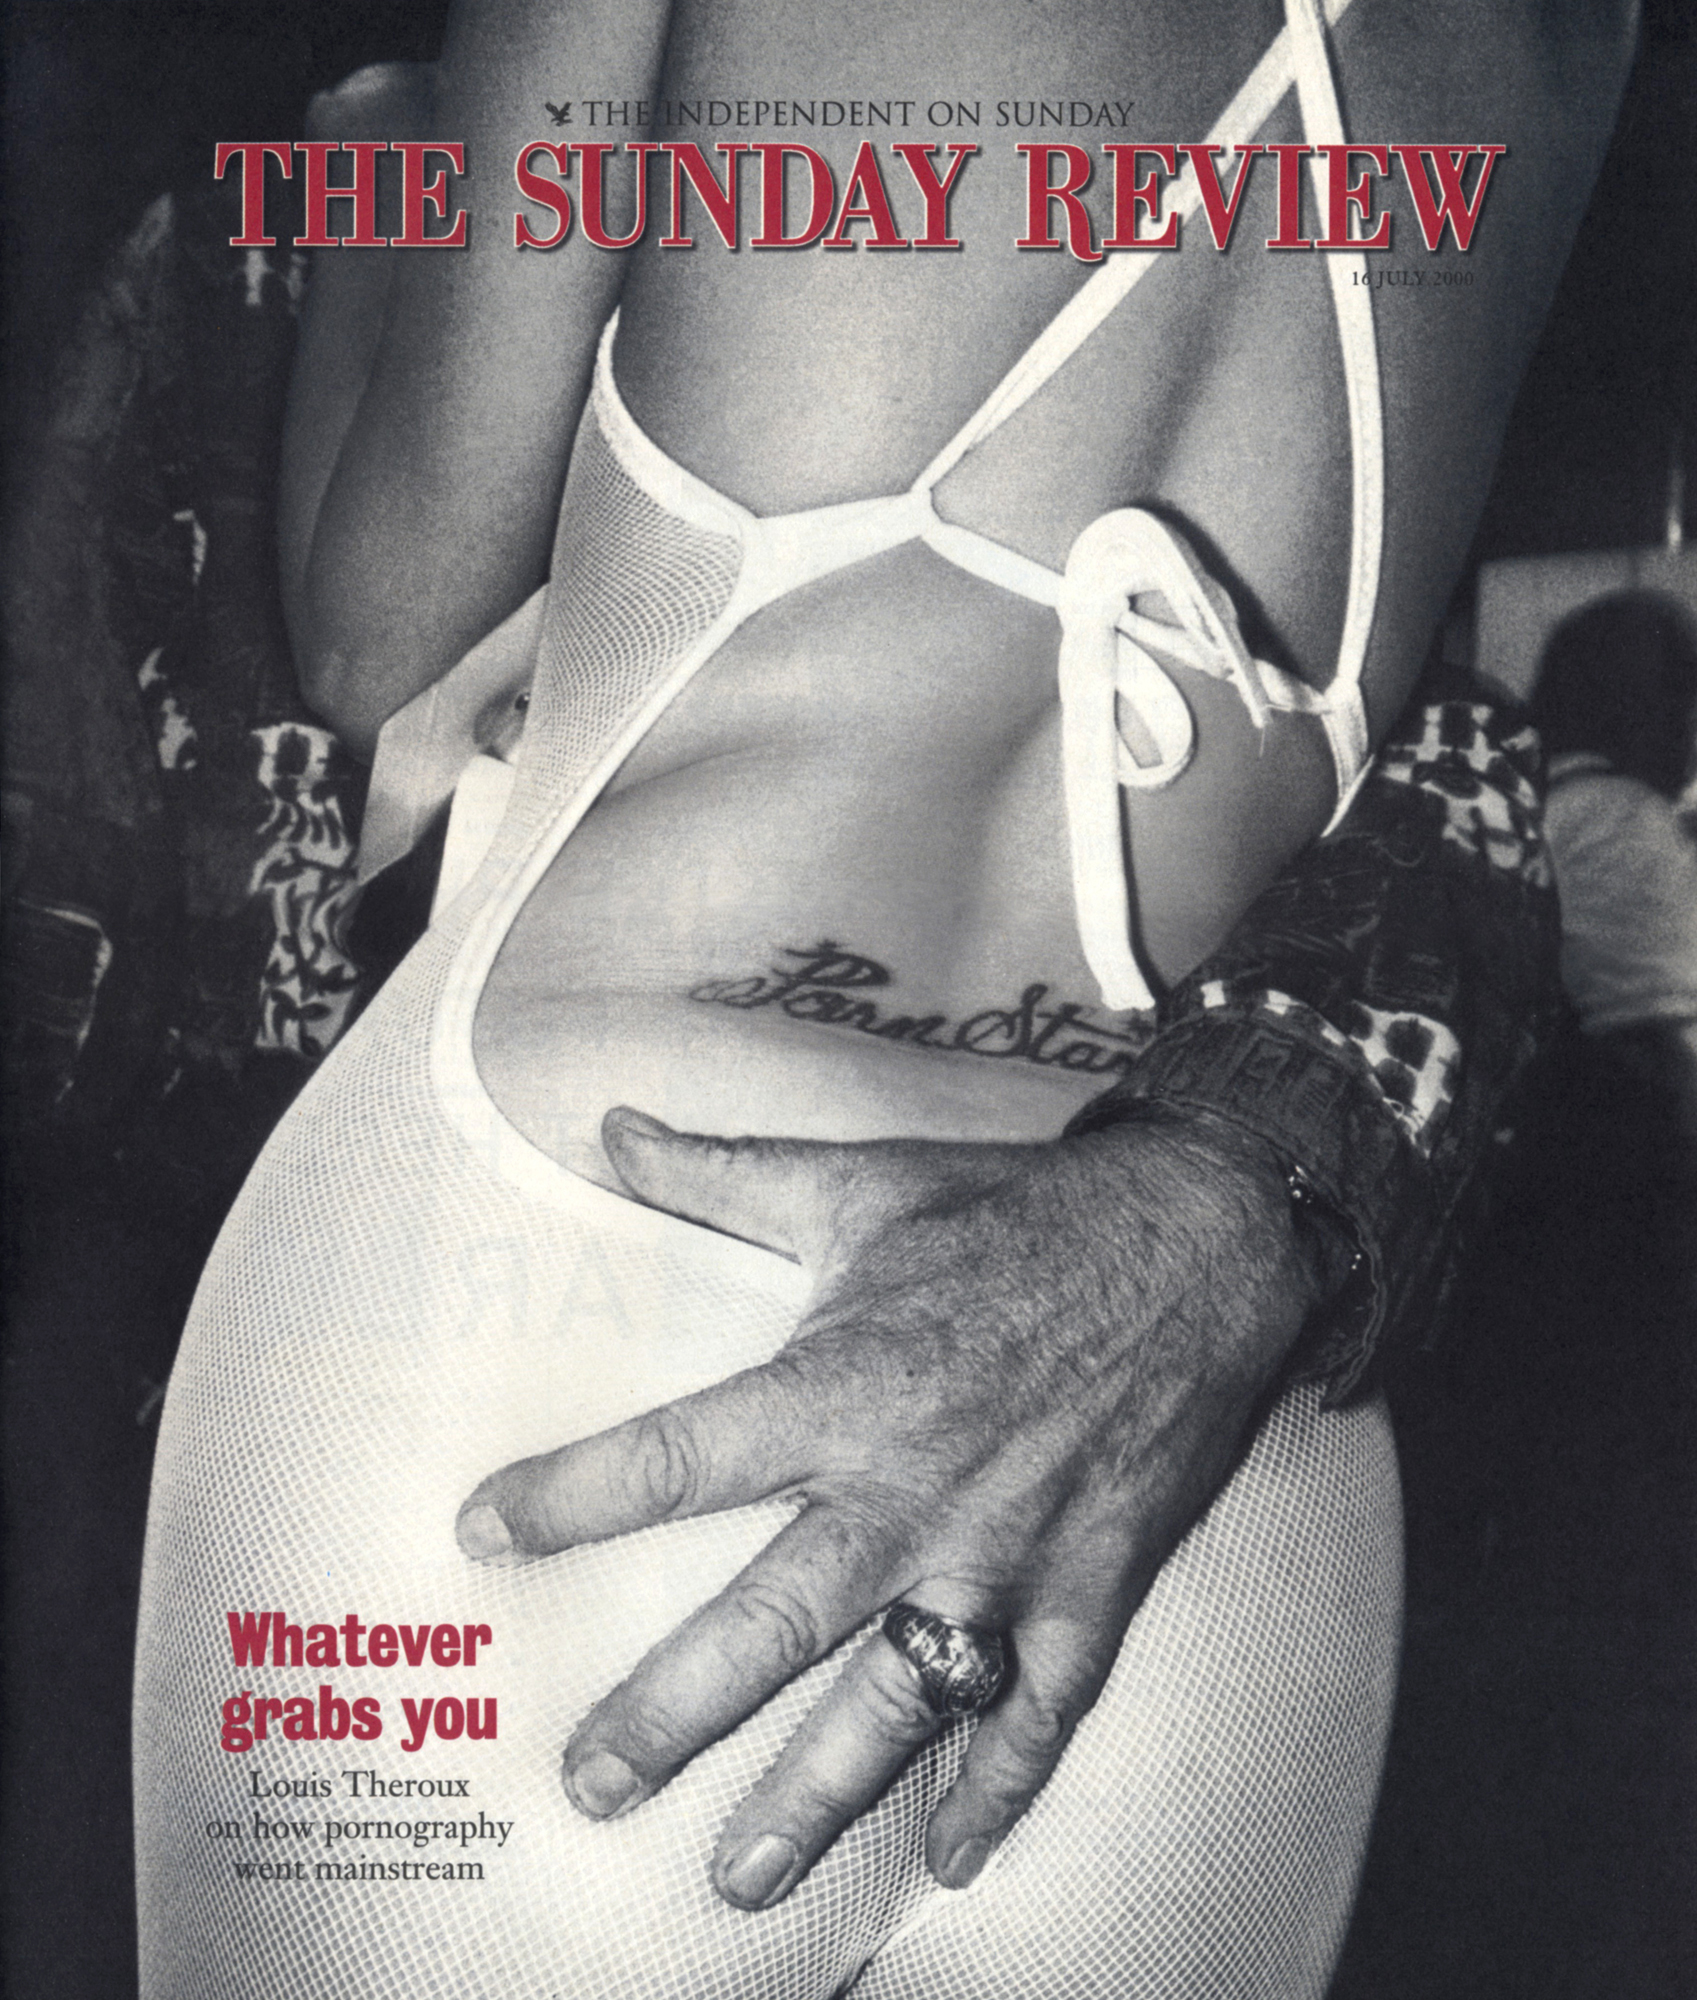 Independent on Sunday, 2000